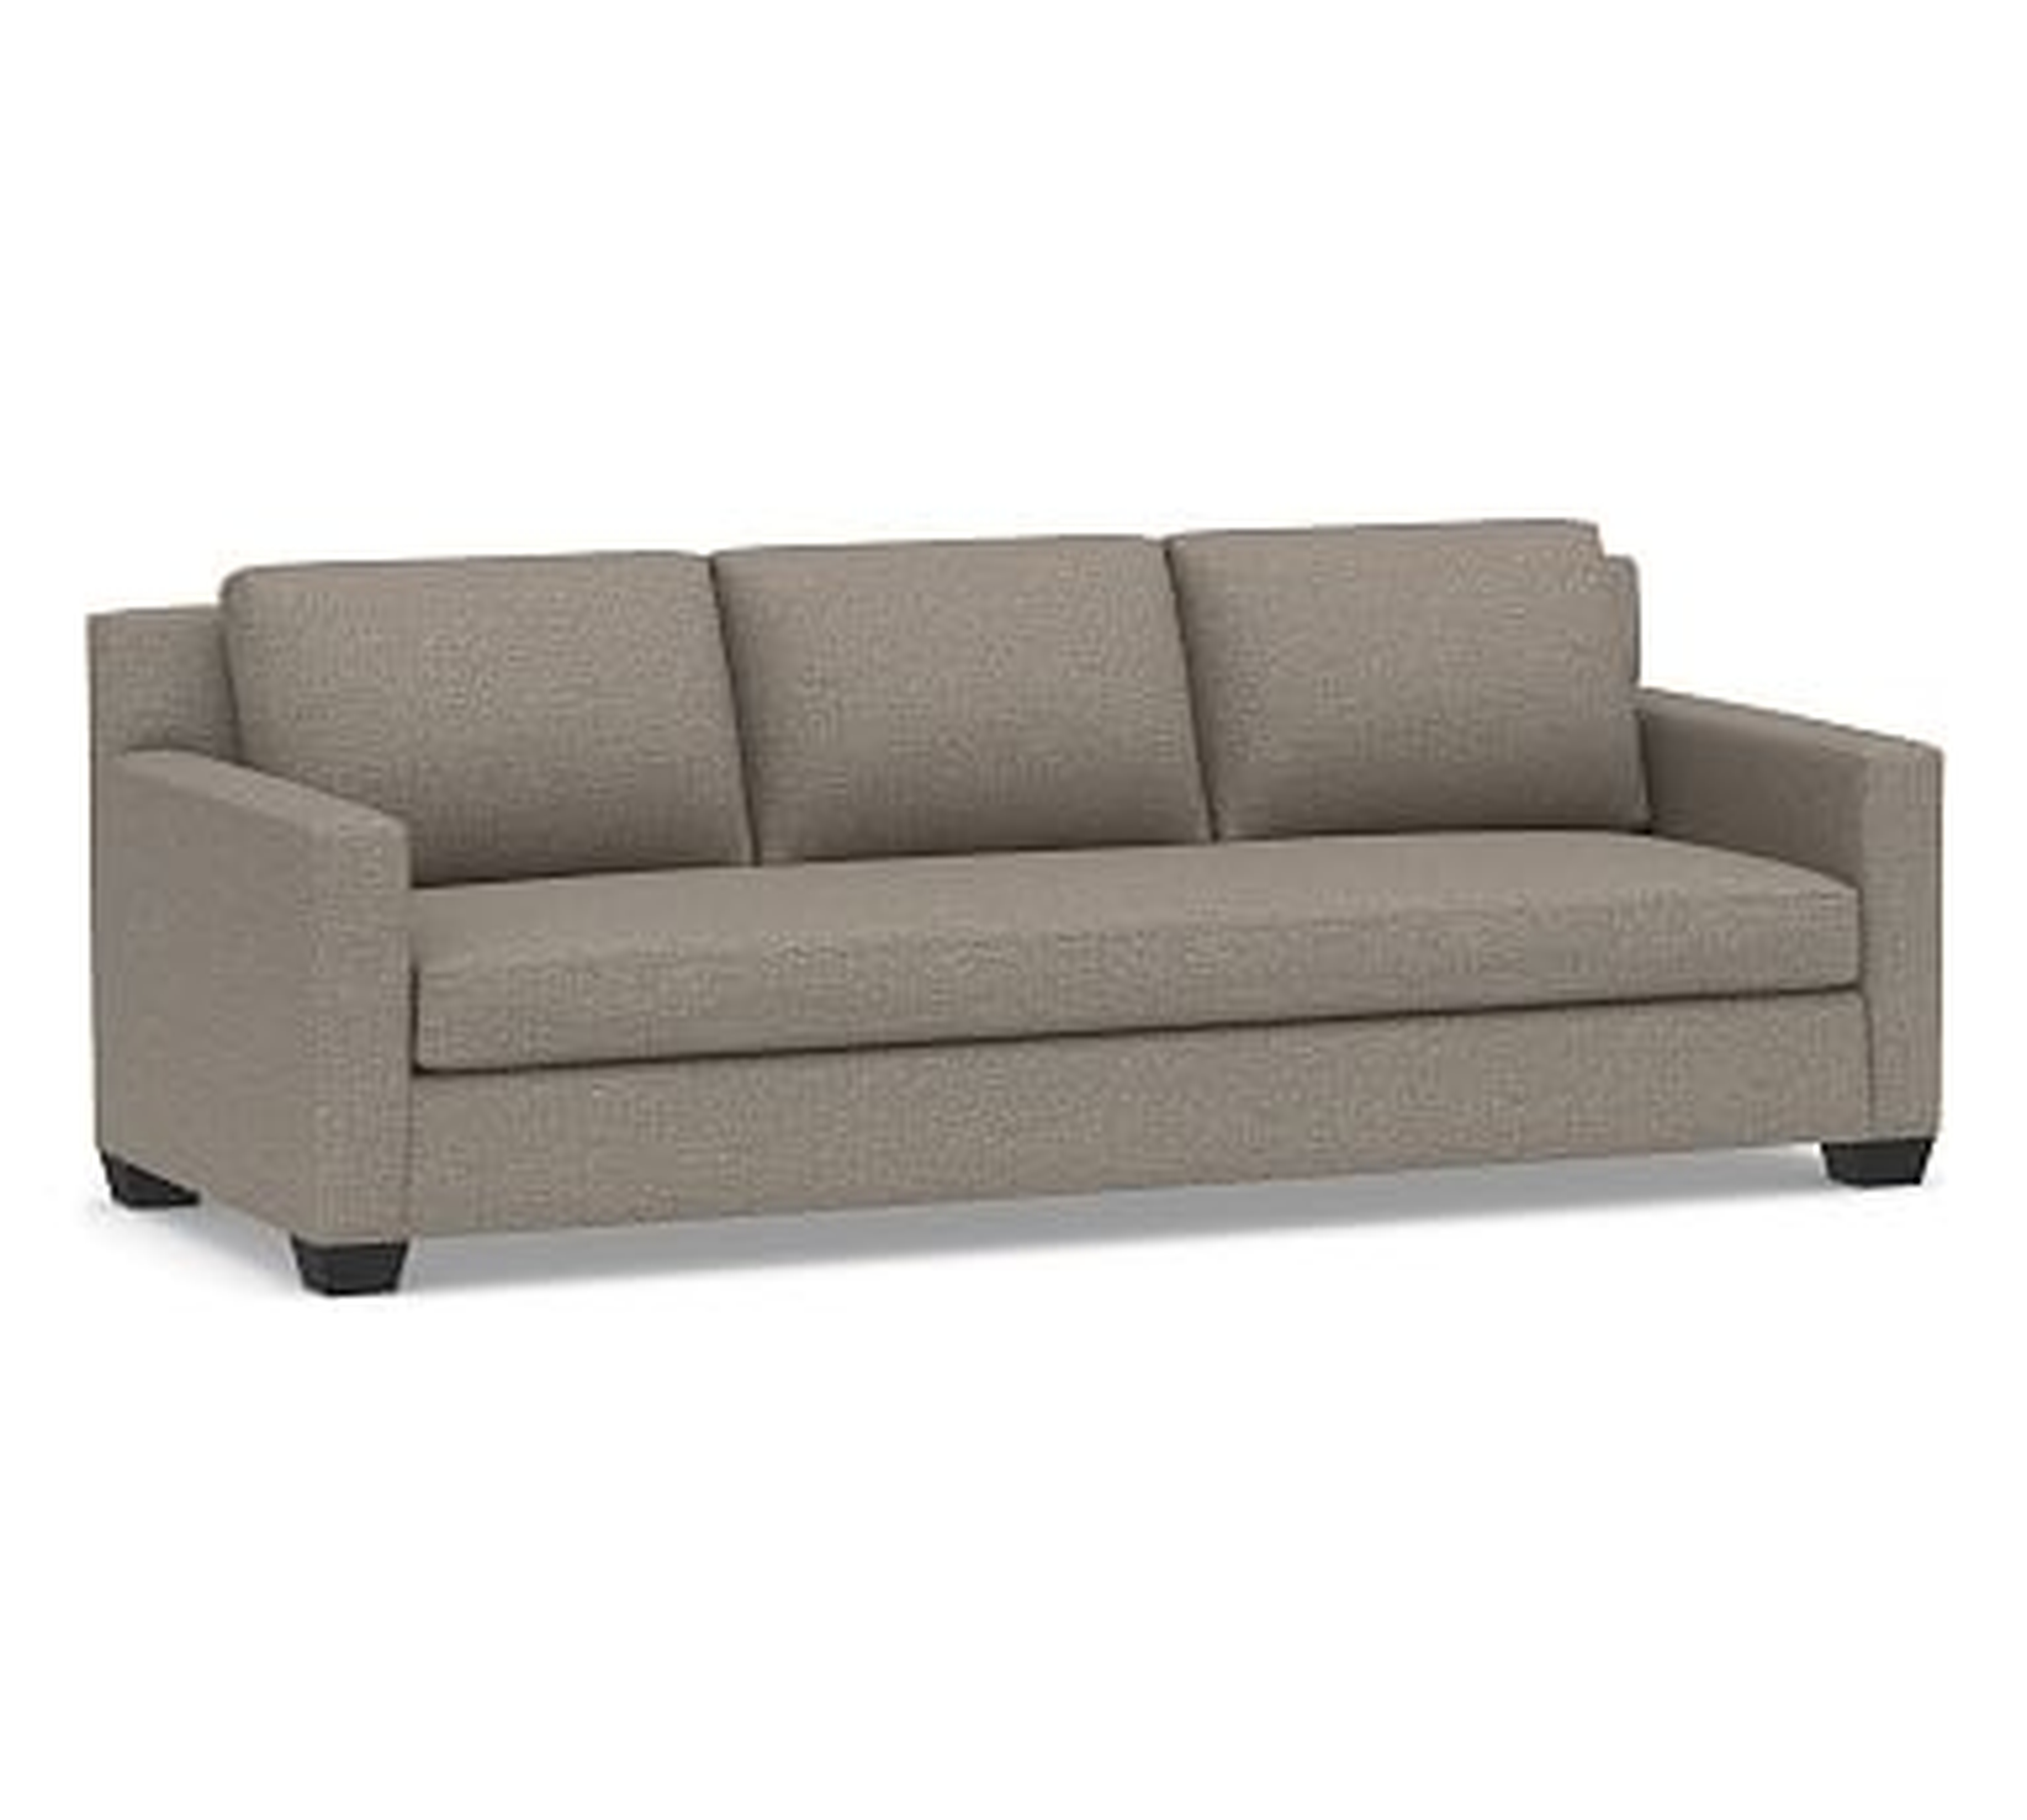 York Square Arm Upholstered Grand Sofa 95.5" with Bench Cushion, Down Blend Wrapped Cushions, Performance Chateau Basketweave Light Gray - Pottery Barn